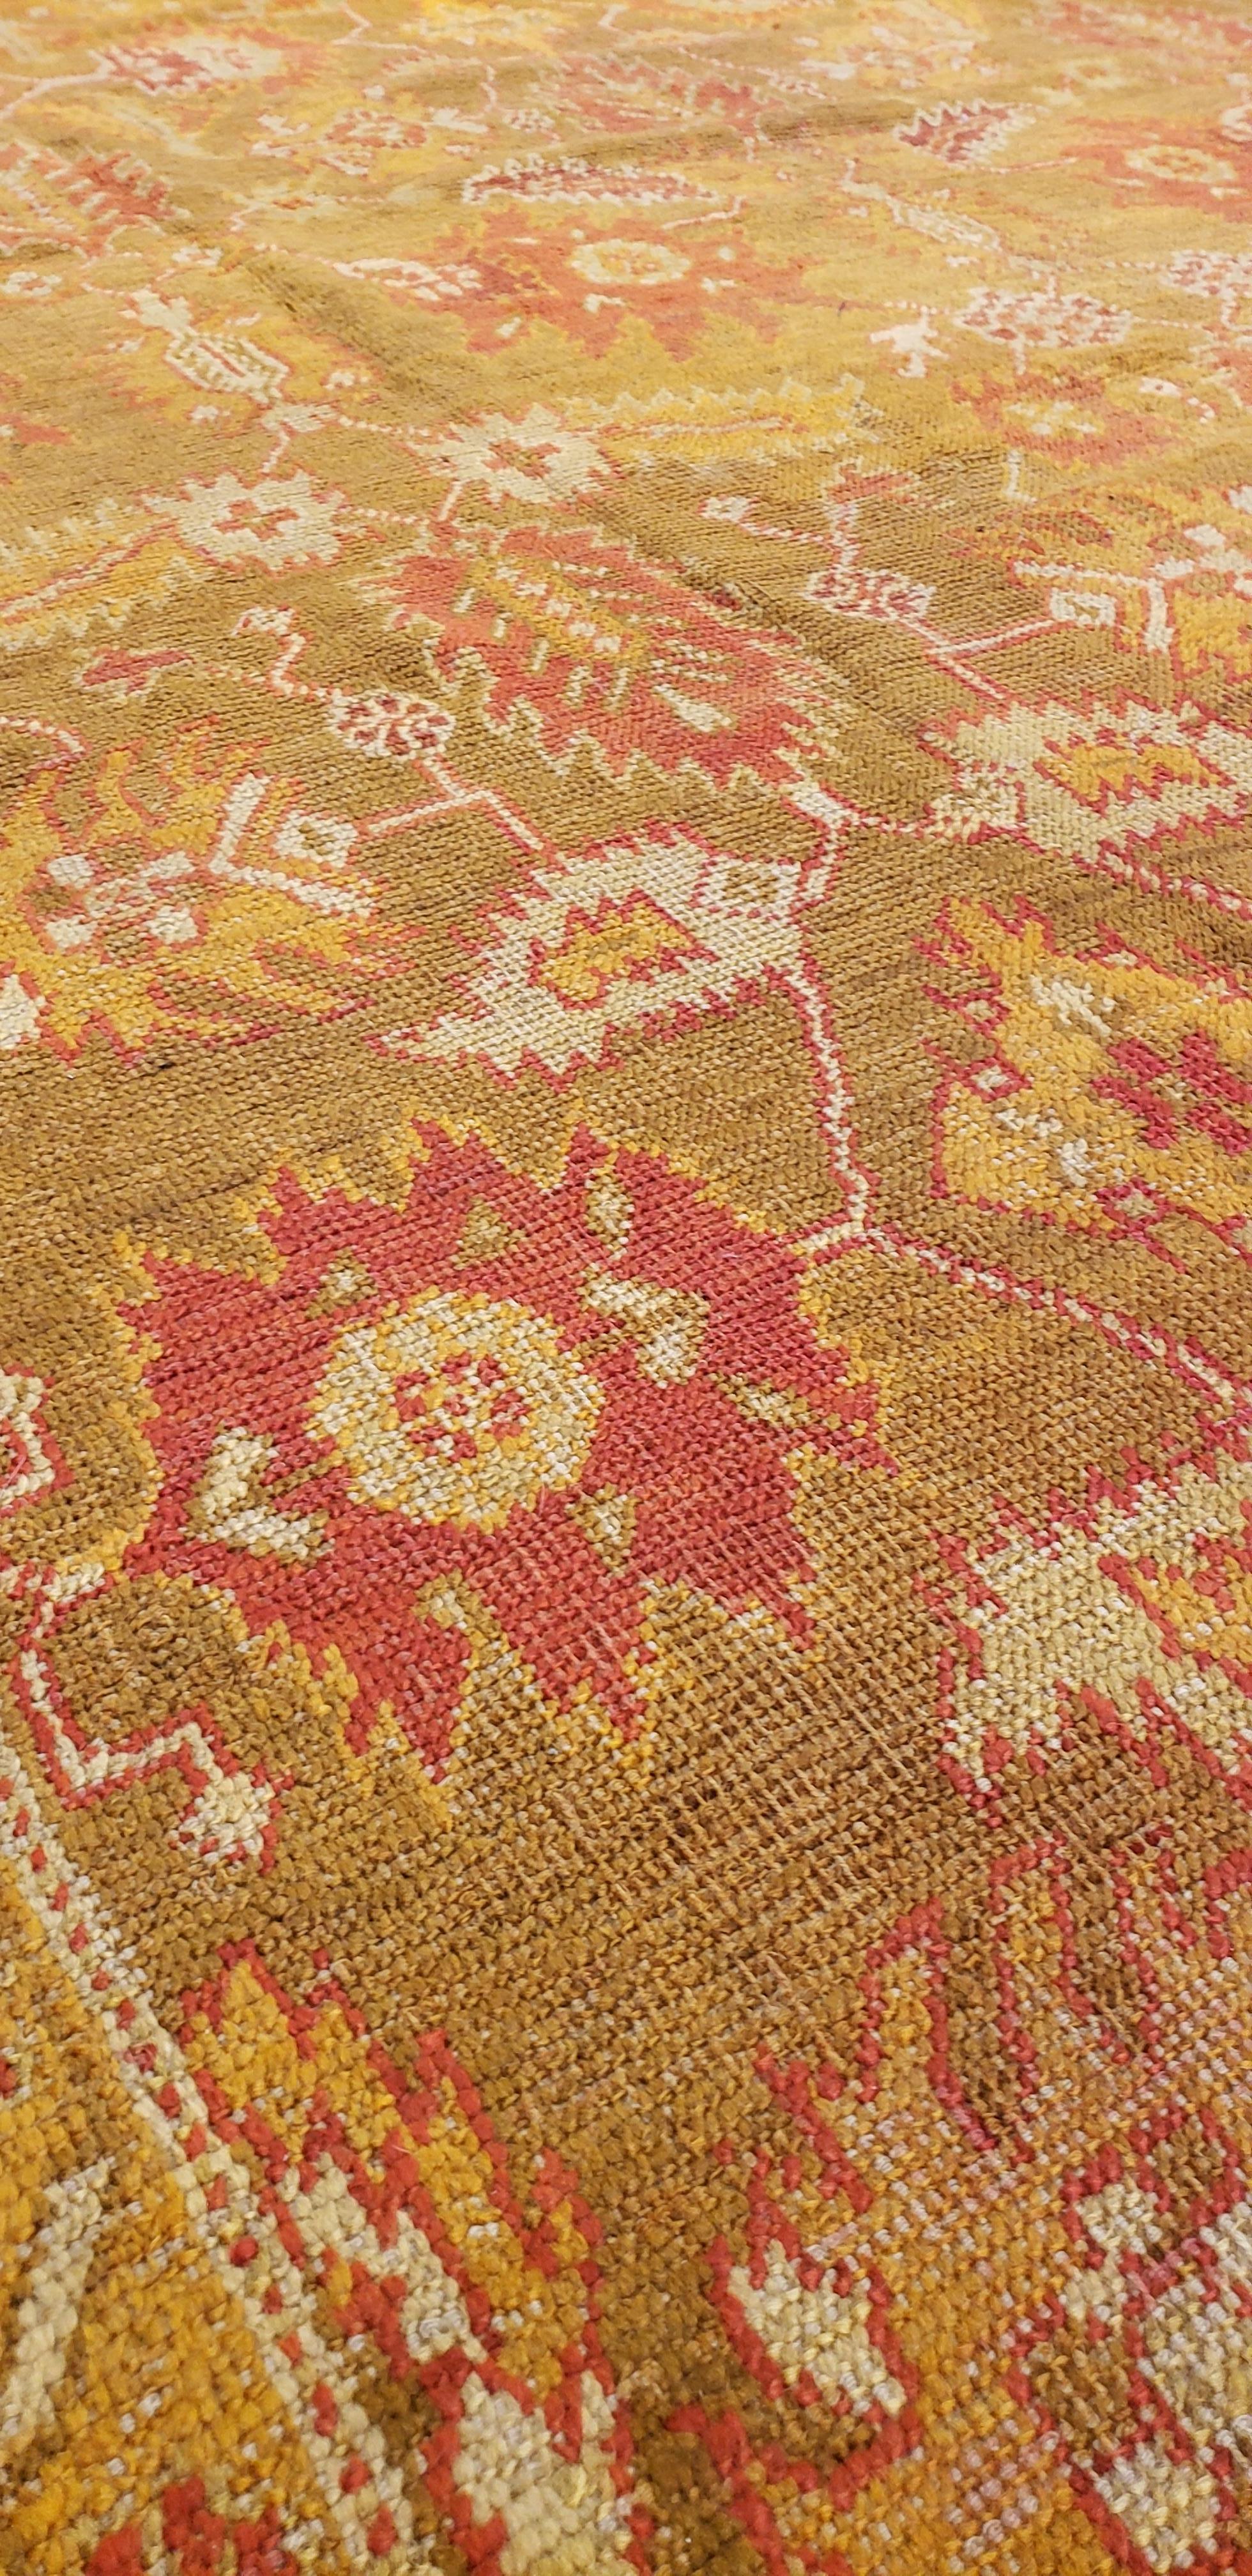 Antique Oushak Carpet, Oriental Rug, Handmade Green, Saffron, Ivory and Coral In Good Condition For Sale In Port Washington, NY